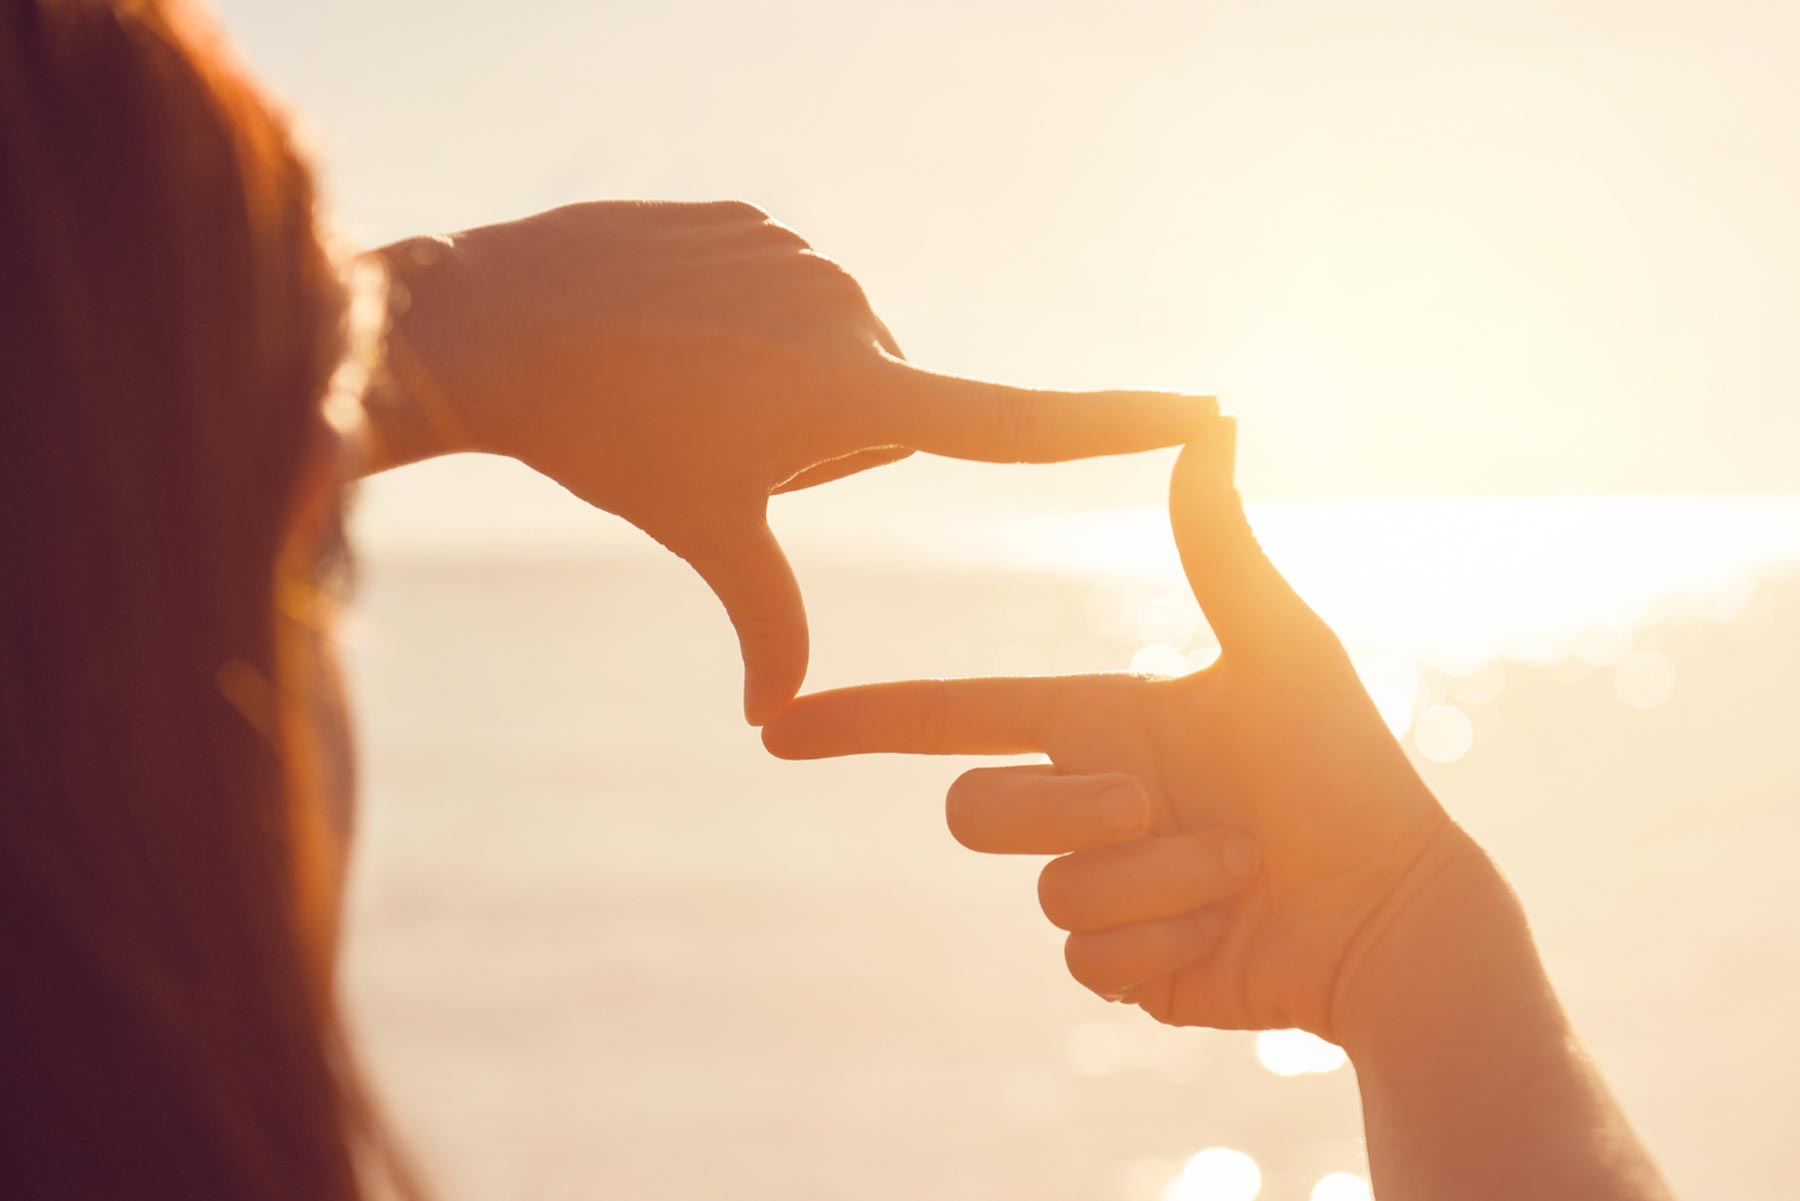 Photo shows a small part of the side of a person's head, with their back to the camera. The photo is mainly focused on the hands of this individual, which they are using to frame the sunset.